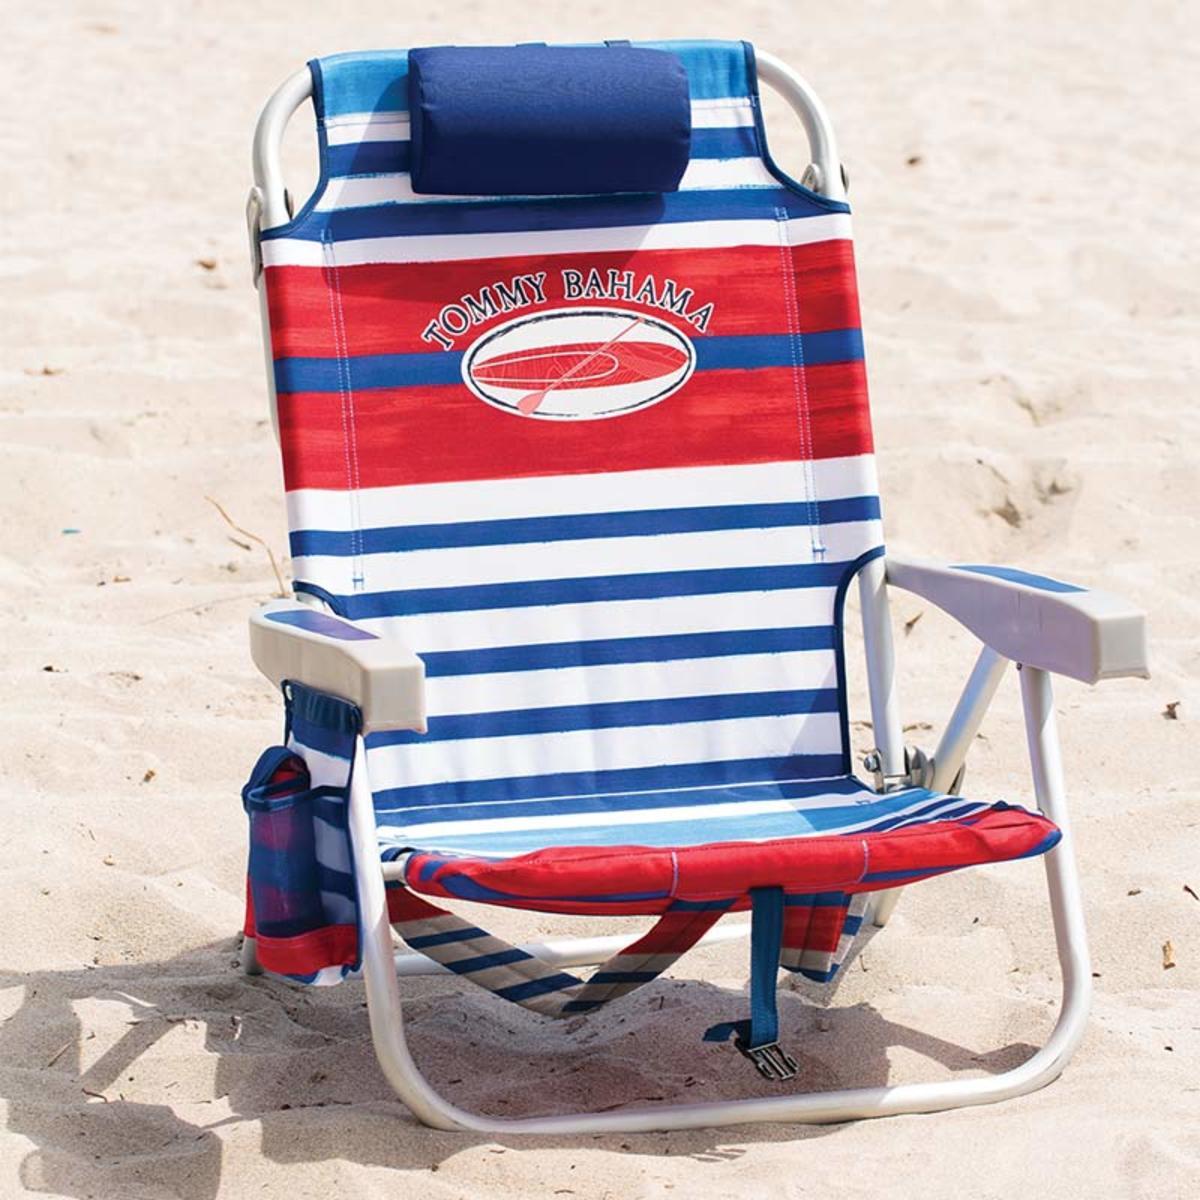 Tommy Bahama Backpack Folding Beach Chair In Red Blue Stripes Costco Uk